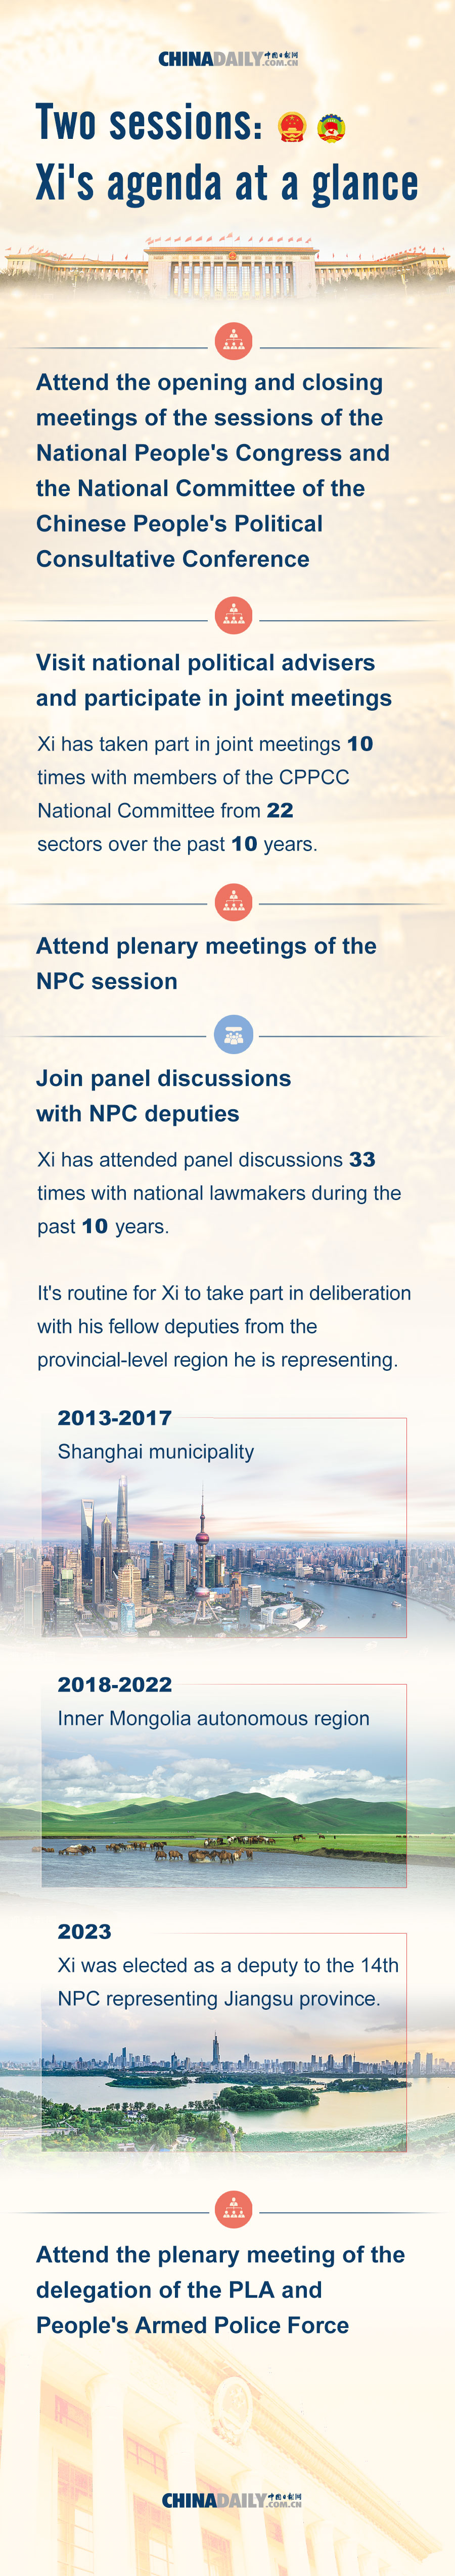 Two sessions: Xi's agenda at a glance